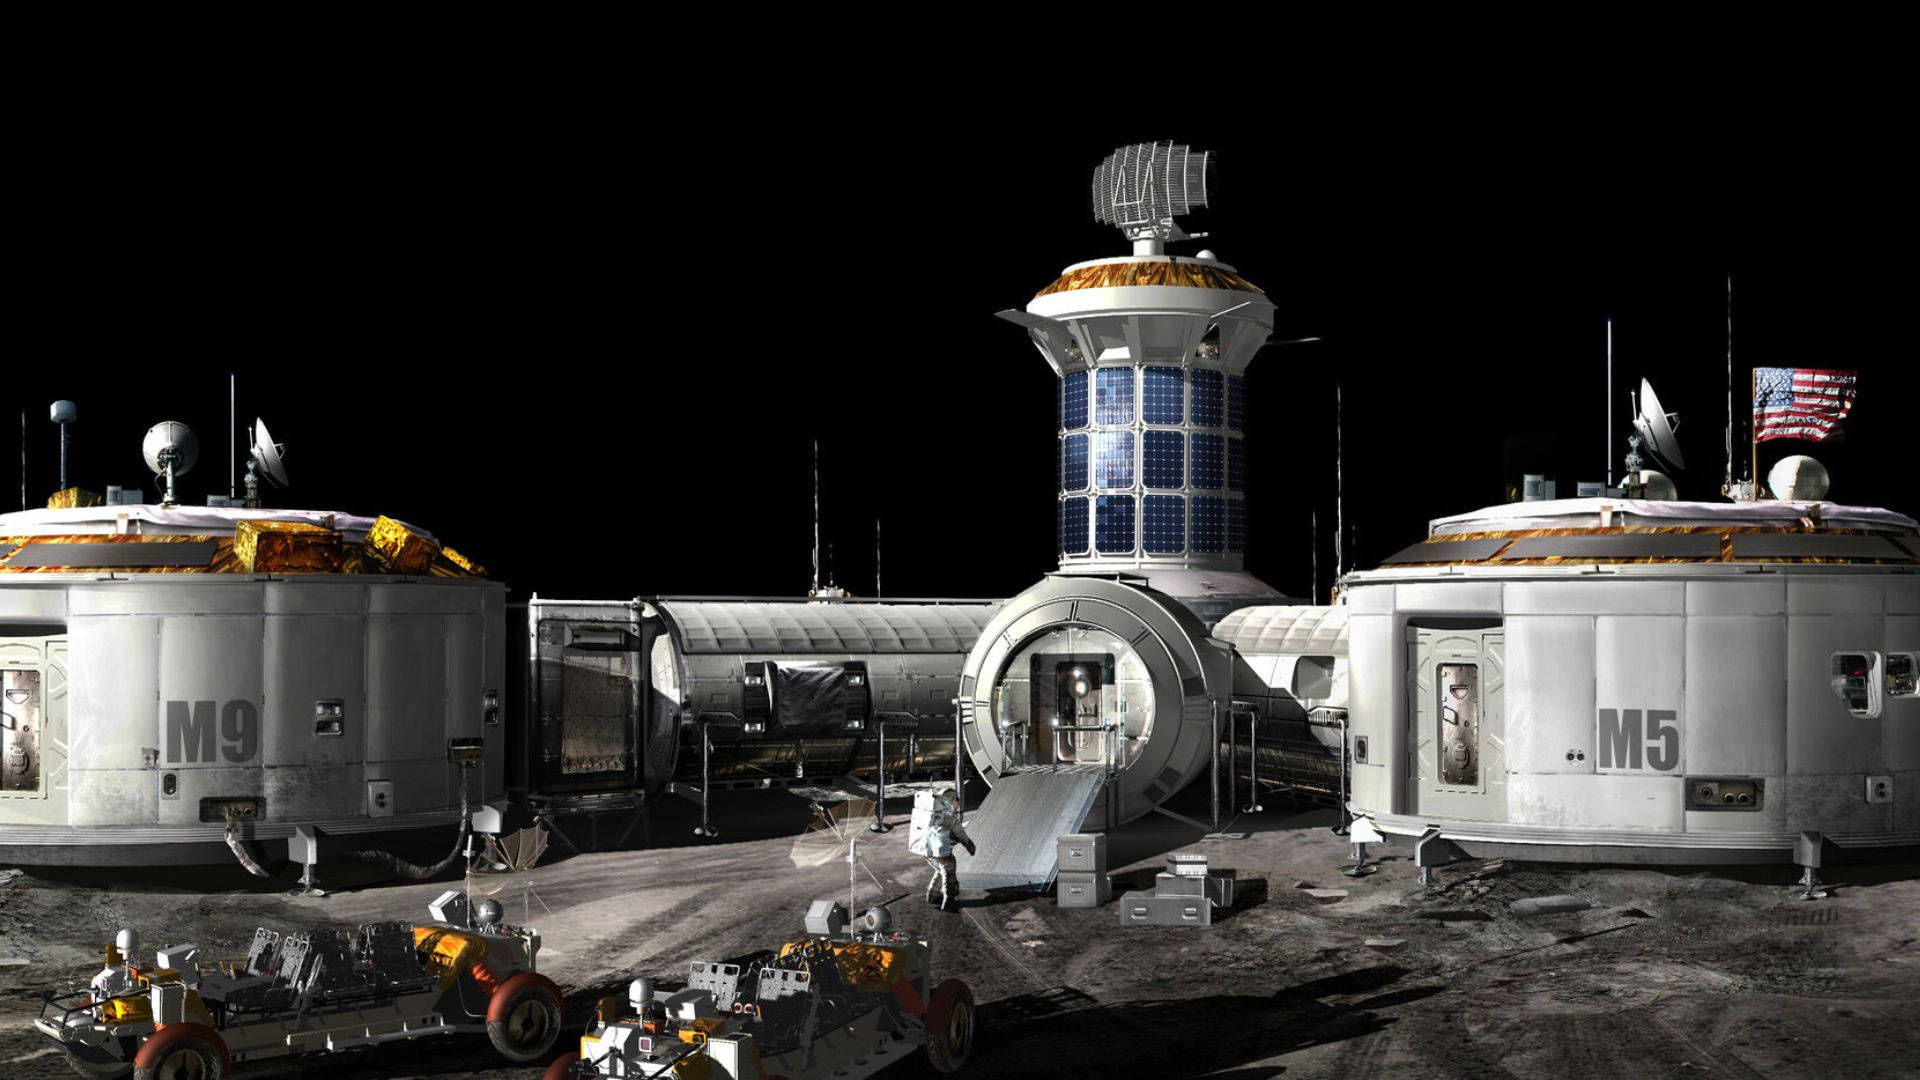 Jamestown Base On Moon - Scene From For All Mankind Series